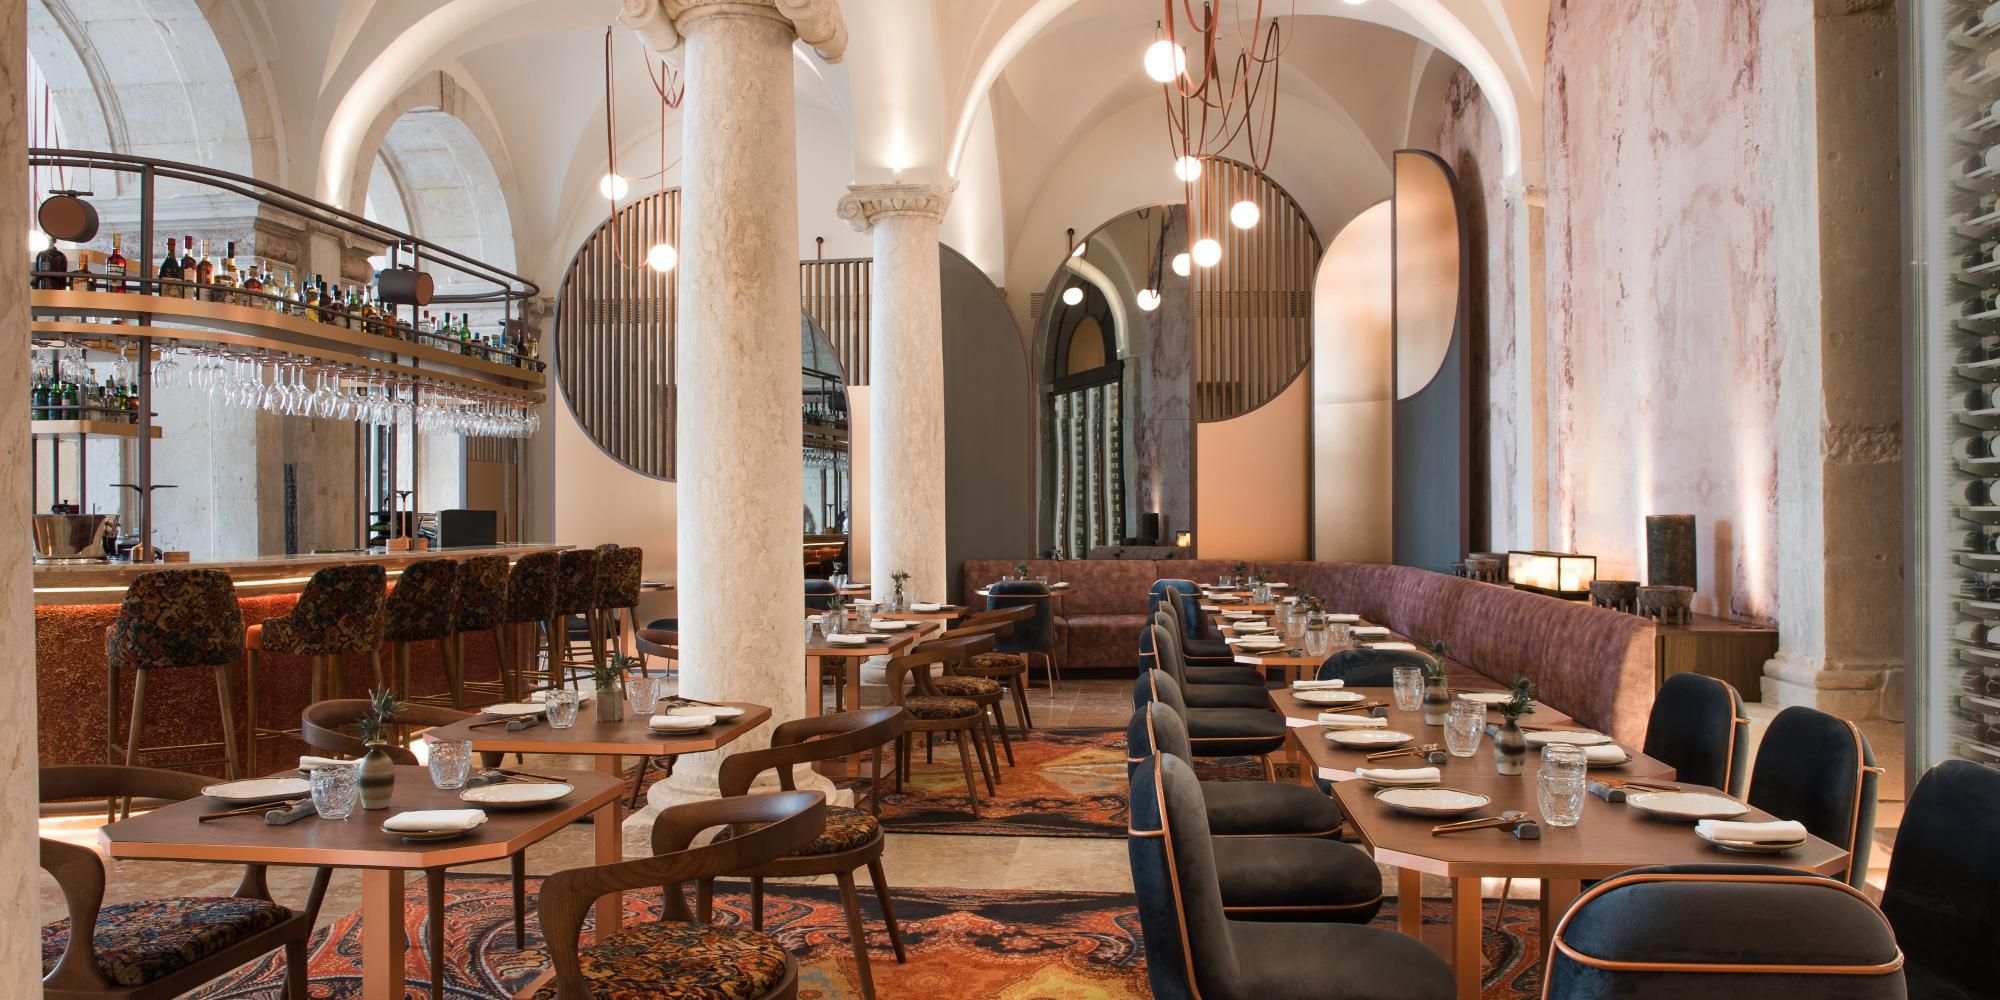 Set in the original chapter house, the noblest room in the convent, Capítulo is where travellers and locals meet to experience traditional Portuguese flavours. Enjoy an awe-inspiring dining experience, featuring Chef Vítor Sobral's signature creations and paired with a selection of Portugal’s finest wines.